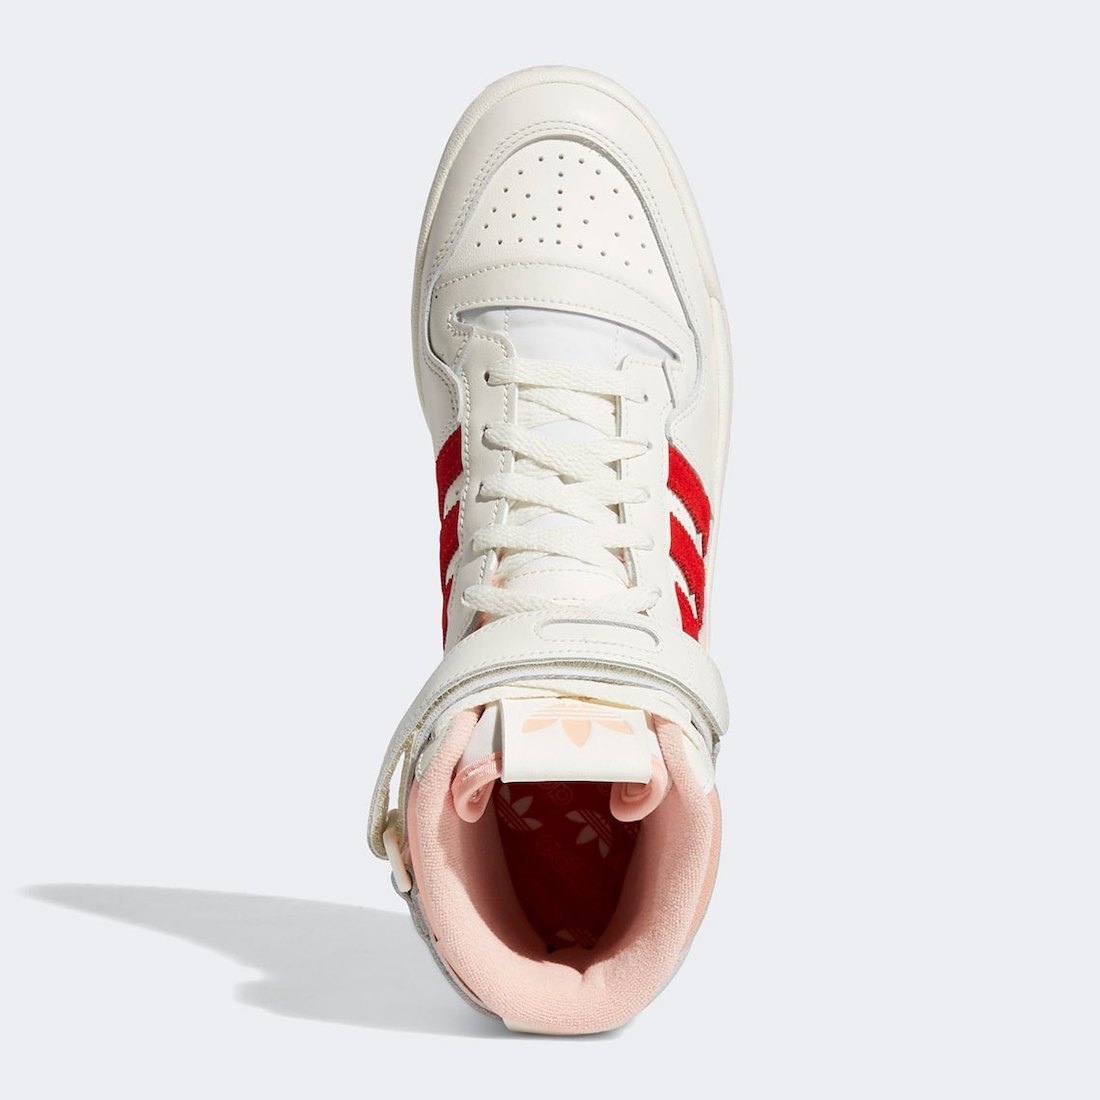 adidas Forum 84 High Off-White Pink Glow Vivid Red H01670 Release Date